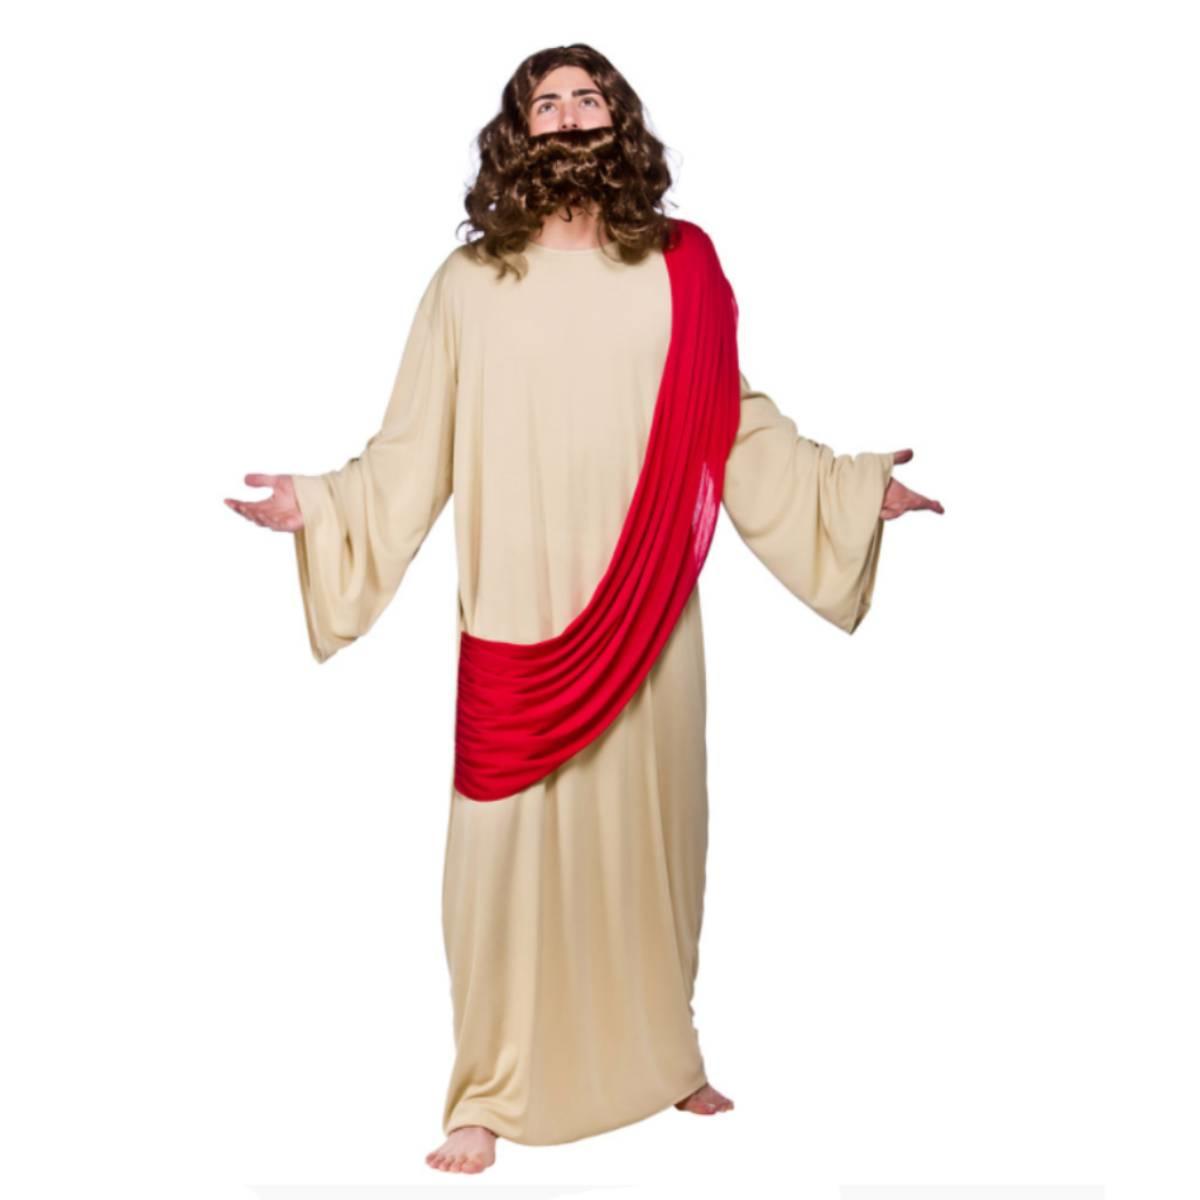 Jesus or prophet adult costume by Wicked EM-3191 available here at Karnival Costumes online party shops